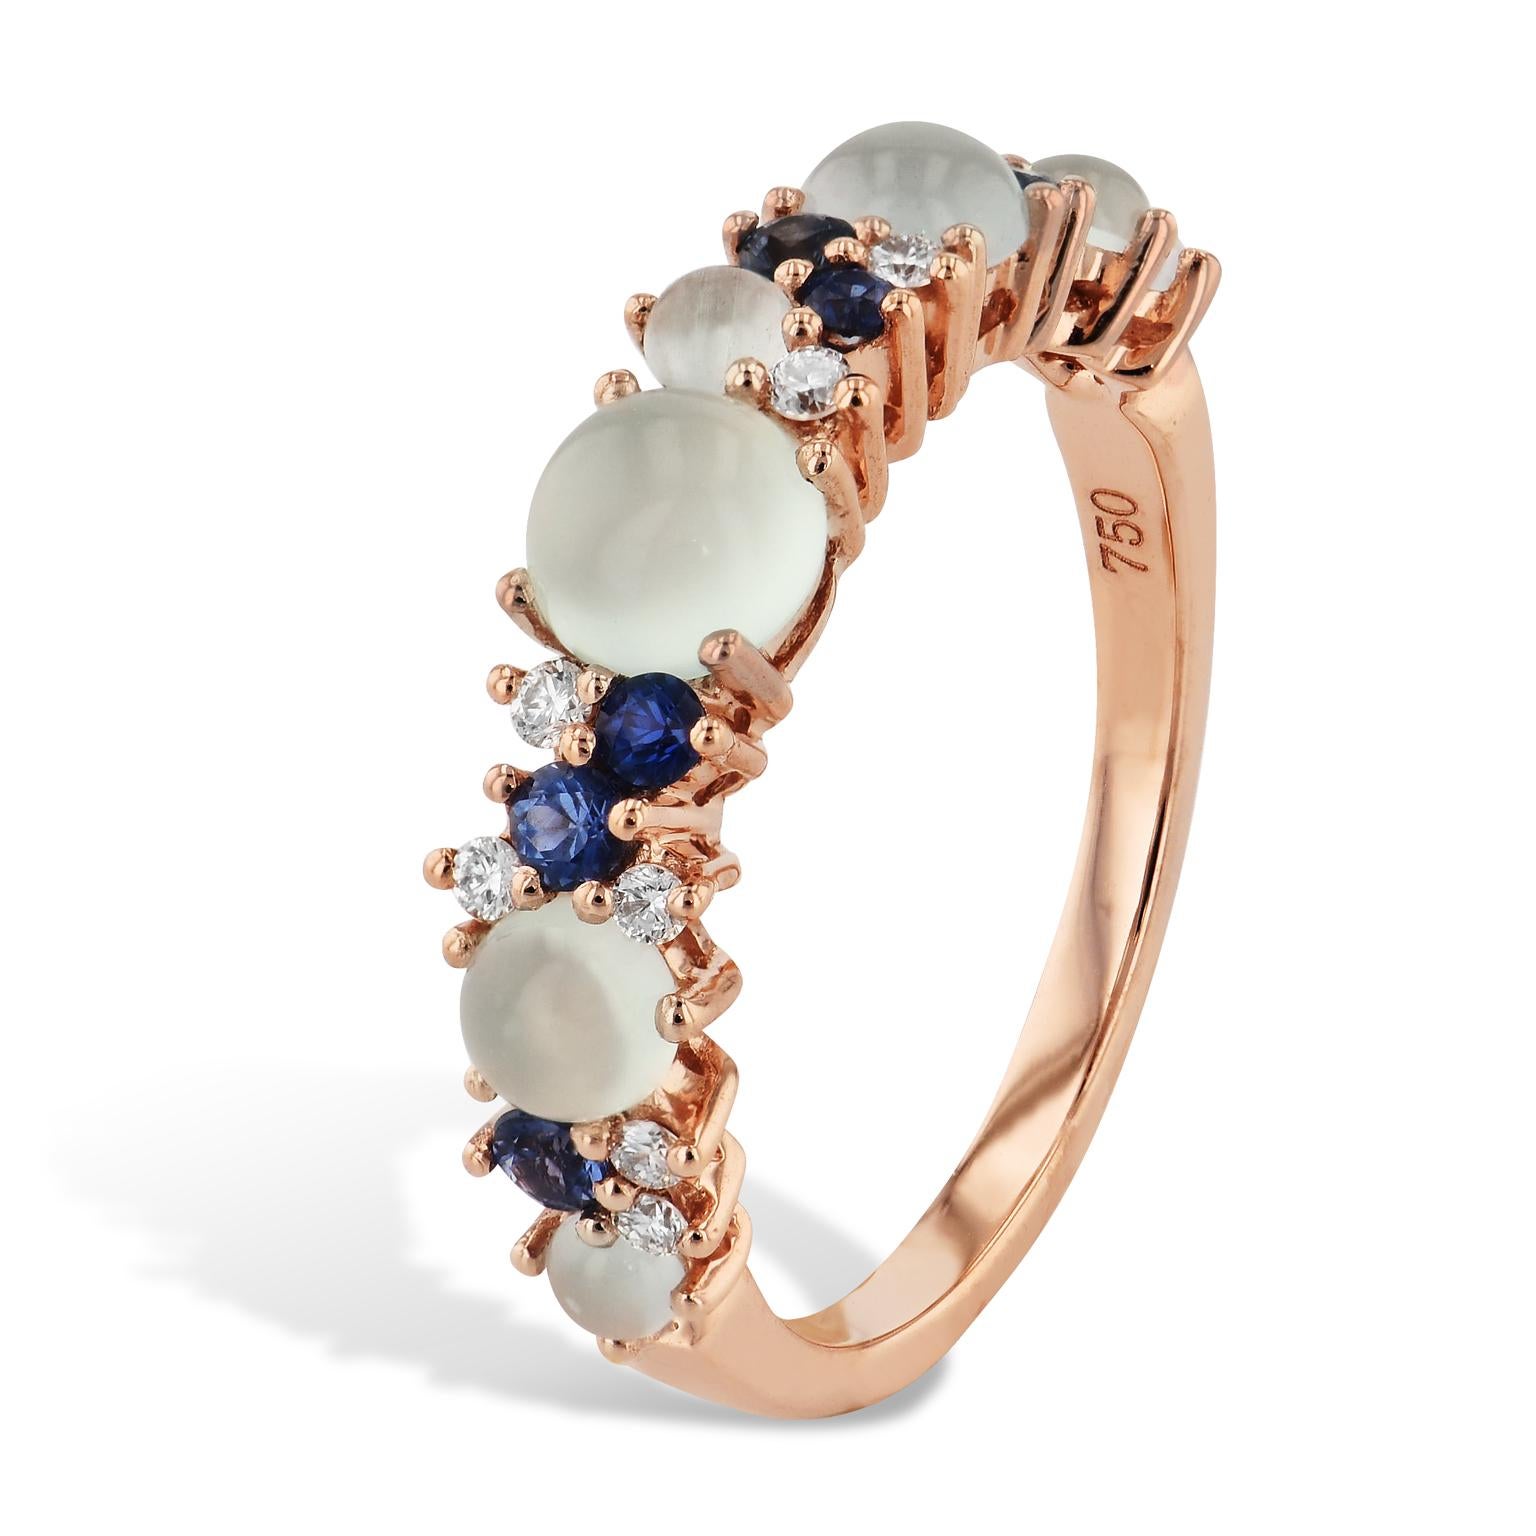 Break out of the ordinary in your style with this eye catching display of cabochon cut chalcedony, diamonds, and blue sapphires all held in a 18 karat rose gold band. 